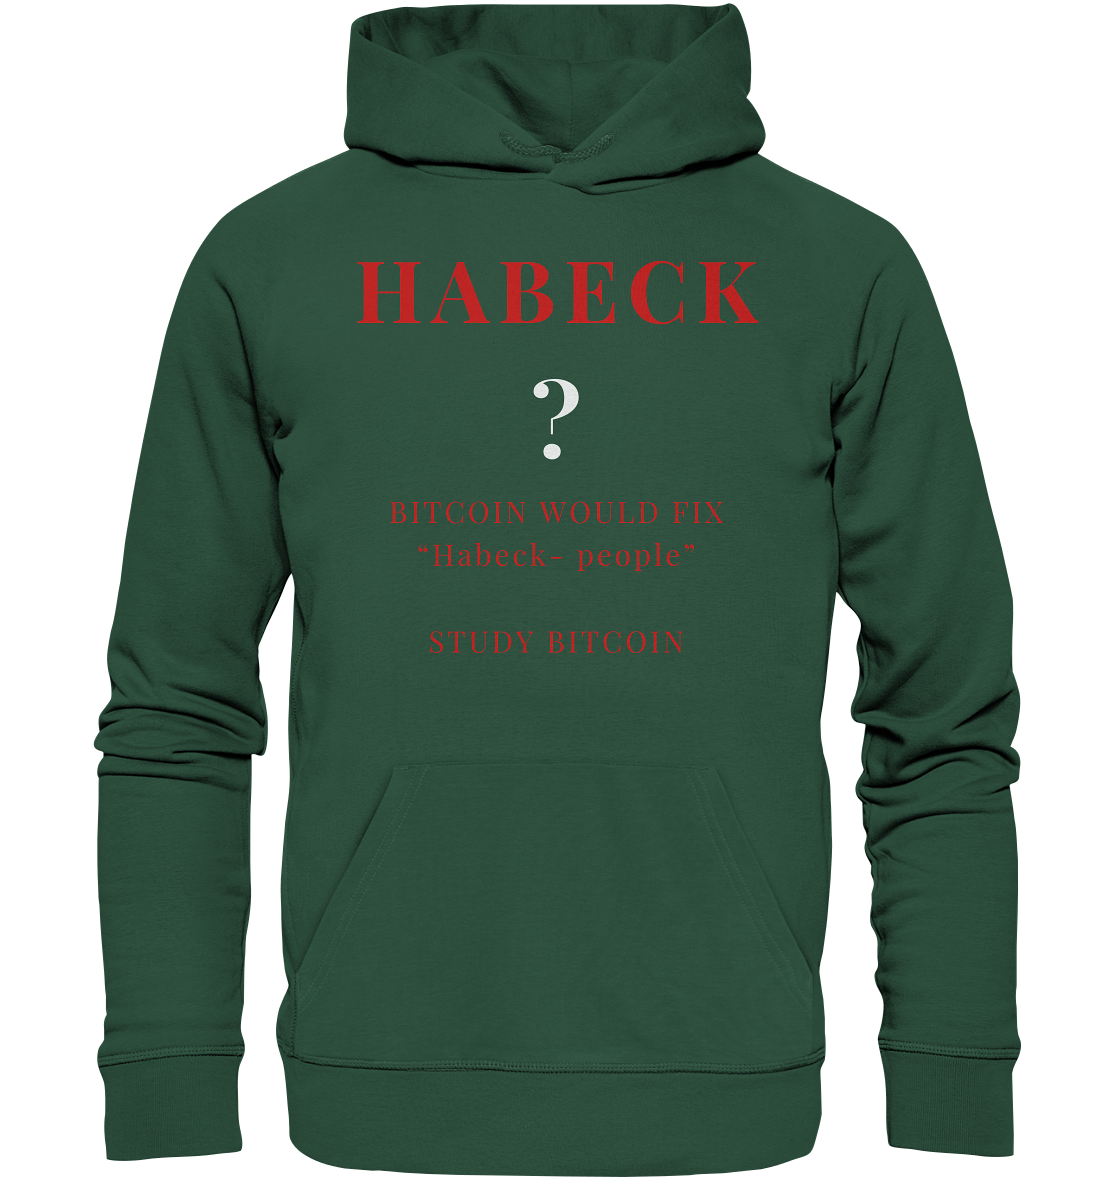 HABECK ? BITCOIN WOULD FIX "Habeck people" - STUDY BITCOIN  - Organic Basic Hoodie